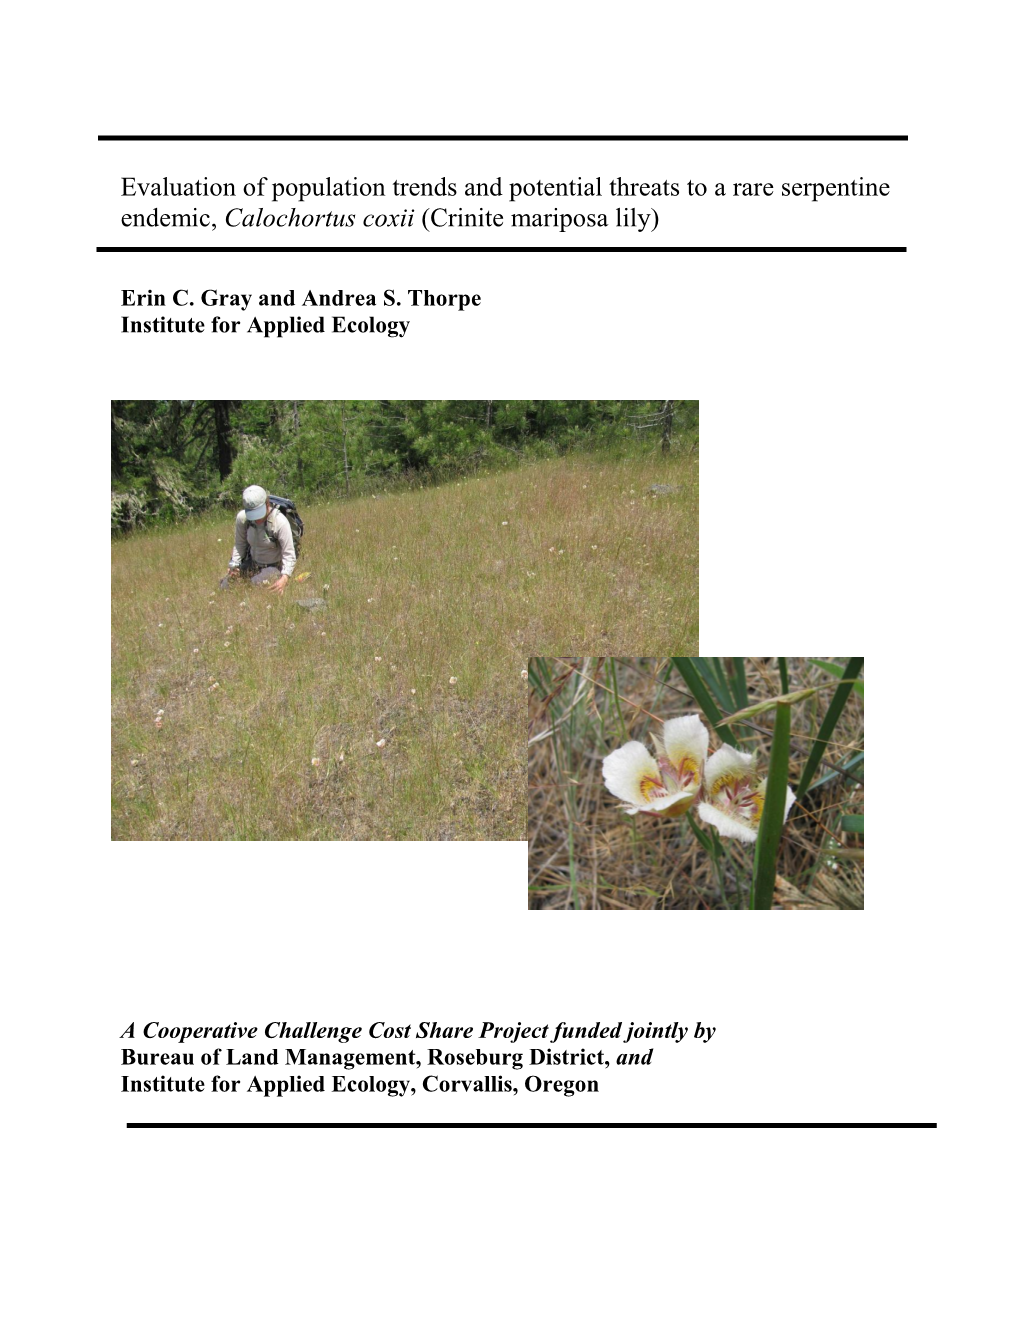 Evaluation of Population Trends and Potential Threats to a Rare Serpentine Endemic, Calochortus Coxii (Crinite Mariposa Lily)